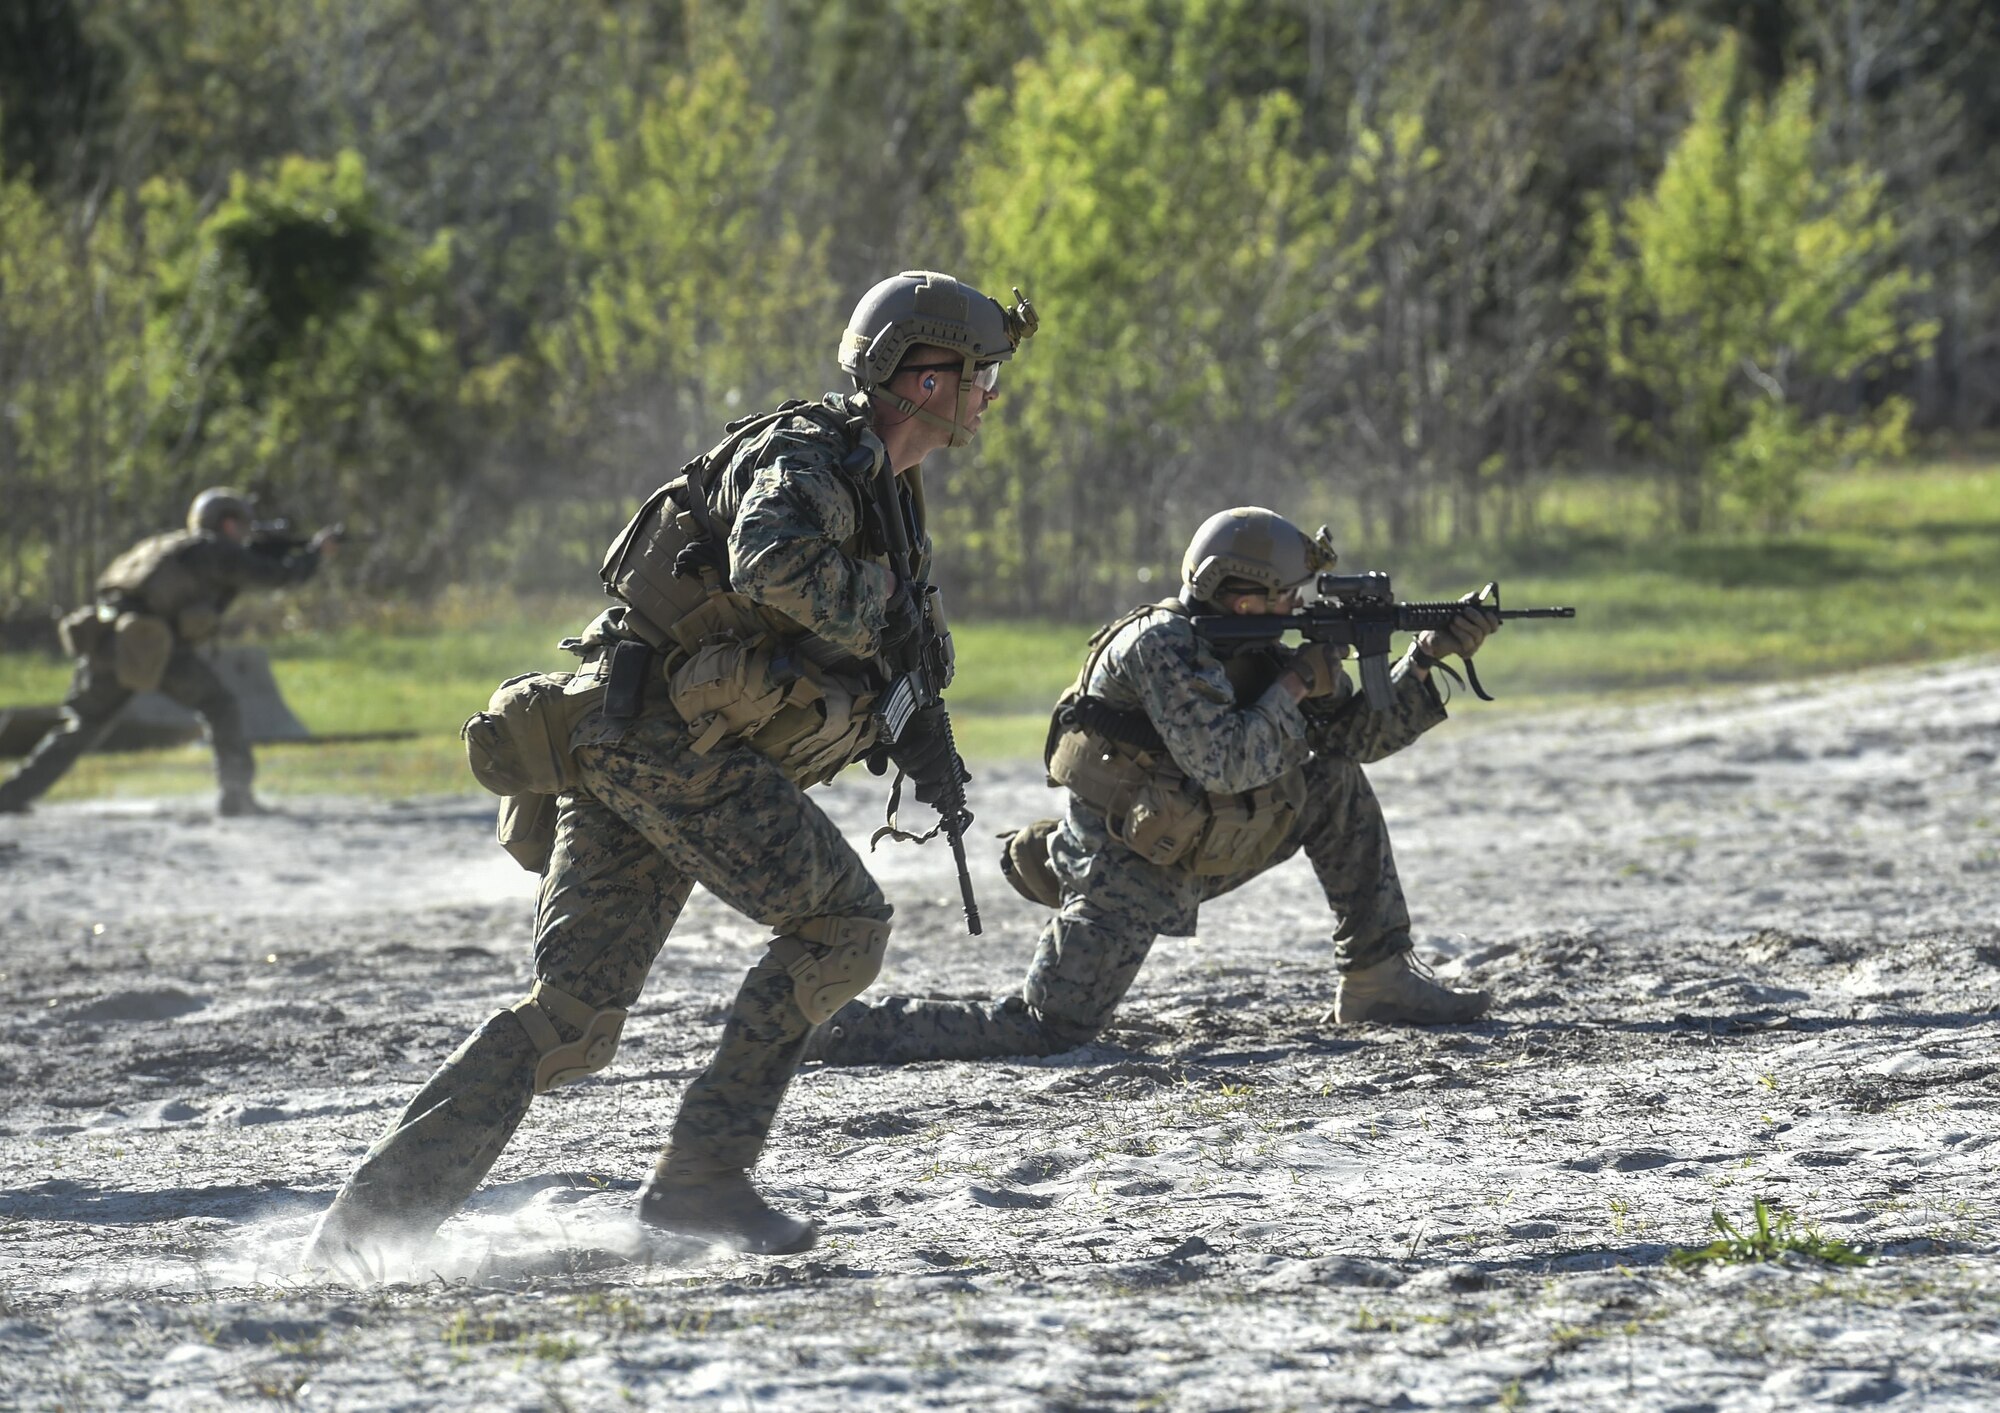 Marine Special Operations School Individual Training Course students run toward targets during live-fire maneuvering training, April 11, 2017, at Camp Lejeune, N.C. For the first time, U.S. Air Force Special Tactics Airmen spent three months in Marine Special Operations Command’s Marine Raider training pipeline, representing efforts to build joint mindsets across special operations forces.  (U.S. Air Force photo by Senior Airman Ryan Conroy)